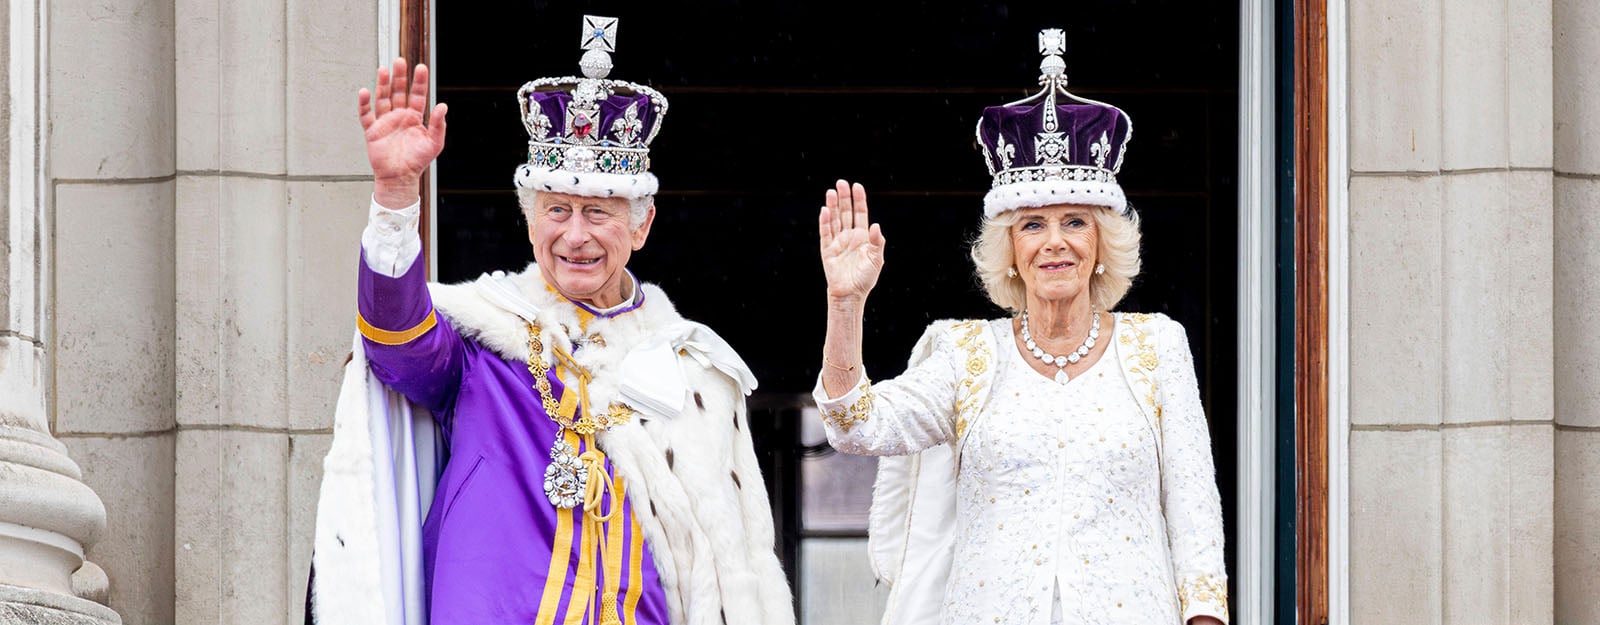 Past exhibition: King Charles III and Queen Camilla on the balcony of Buckingham Palace